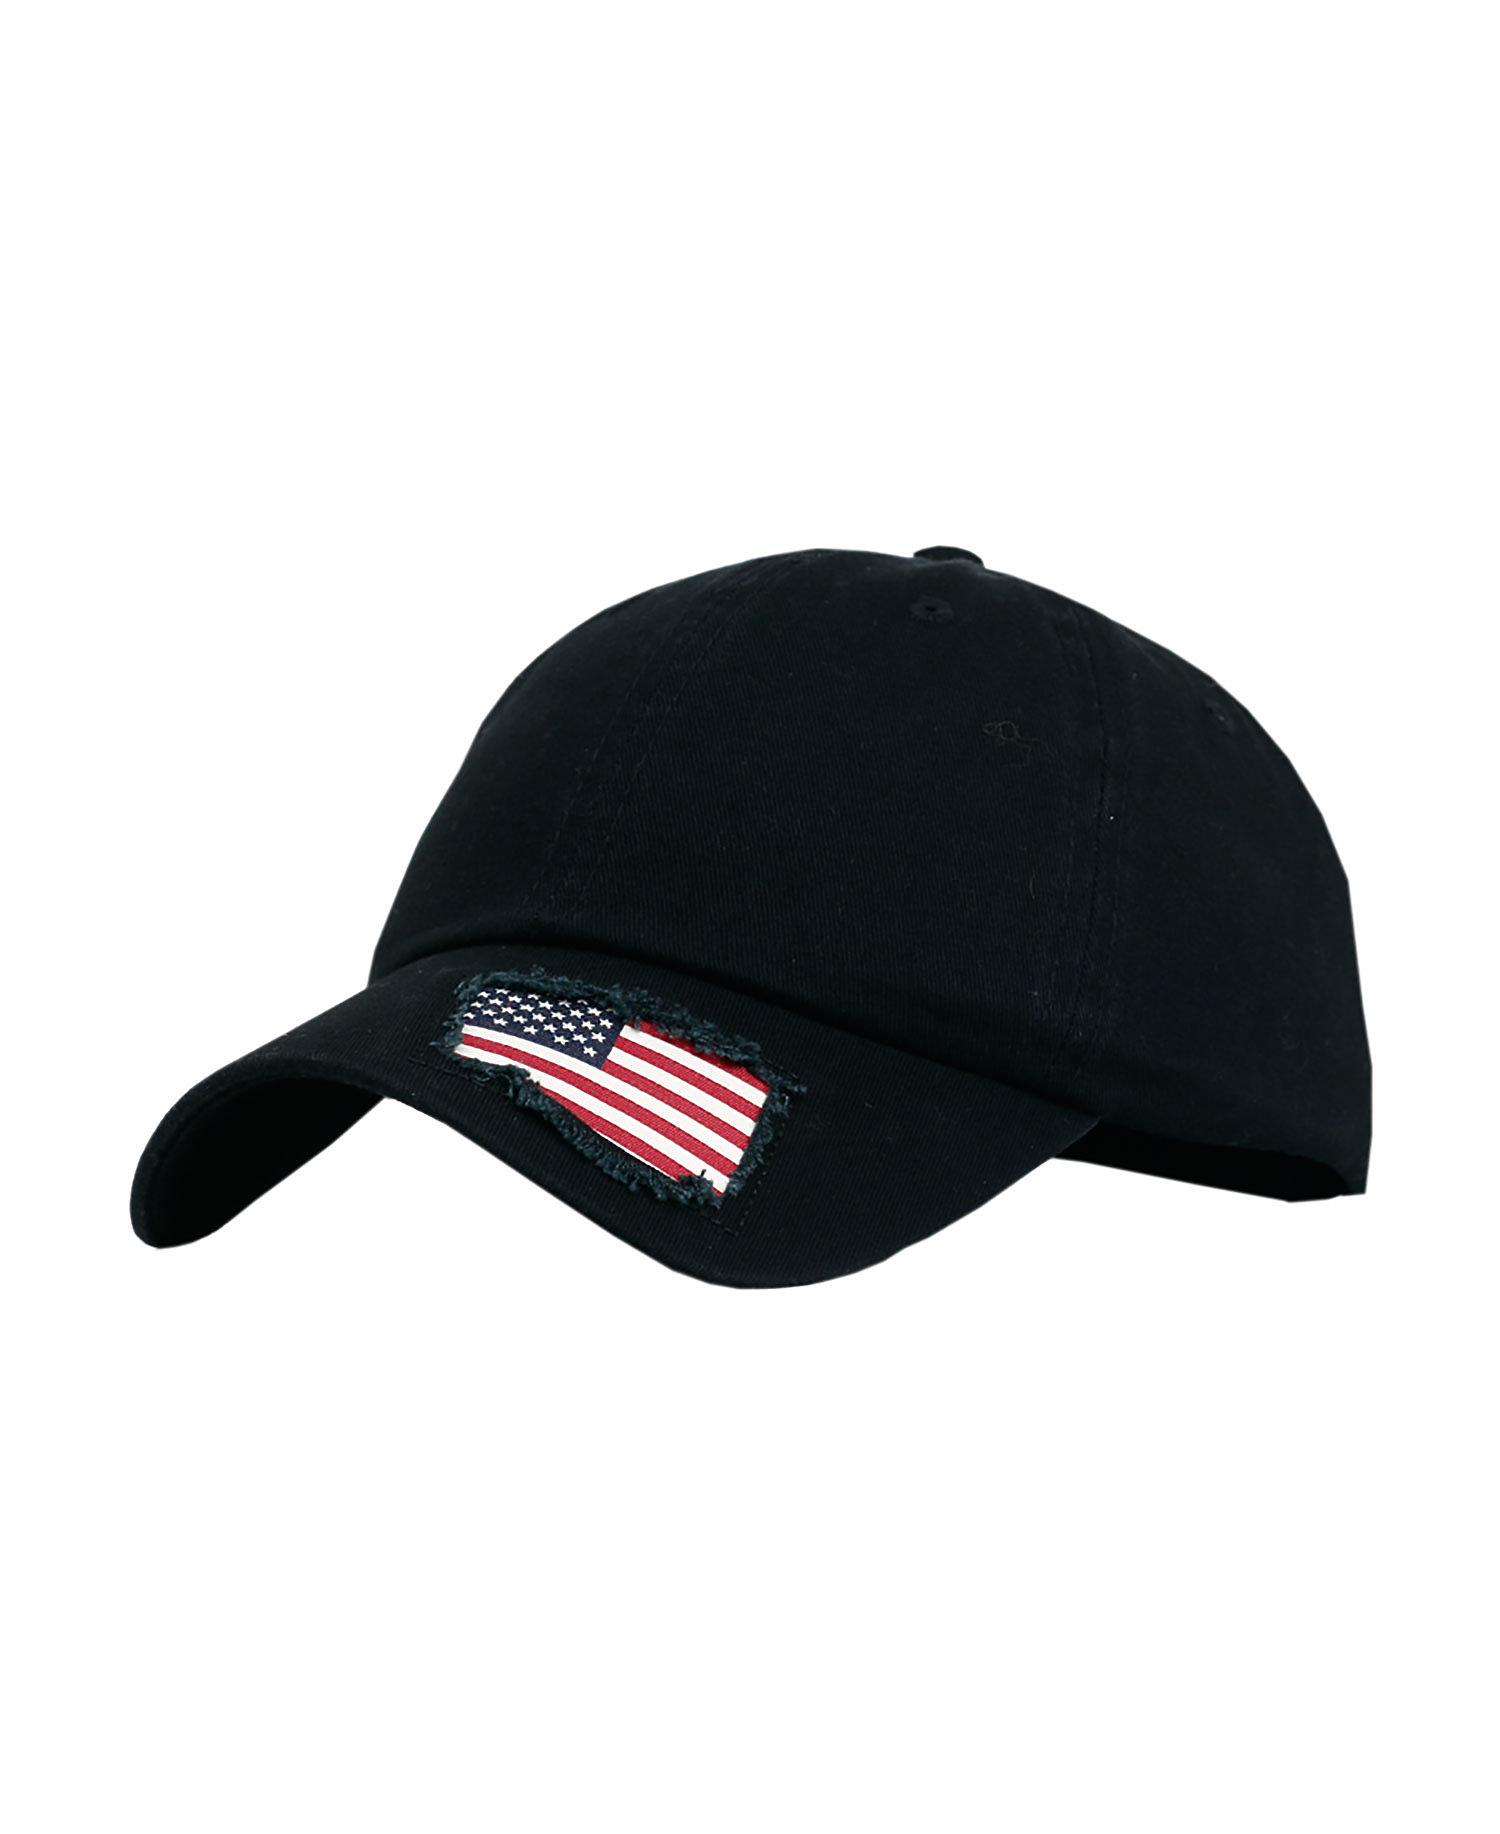 Fahrenheit F0506 - Garment Washed Cotton with Woven Flag Cap